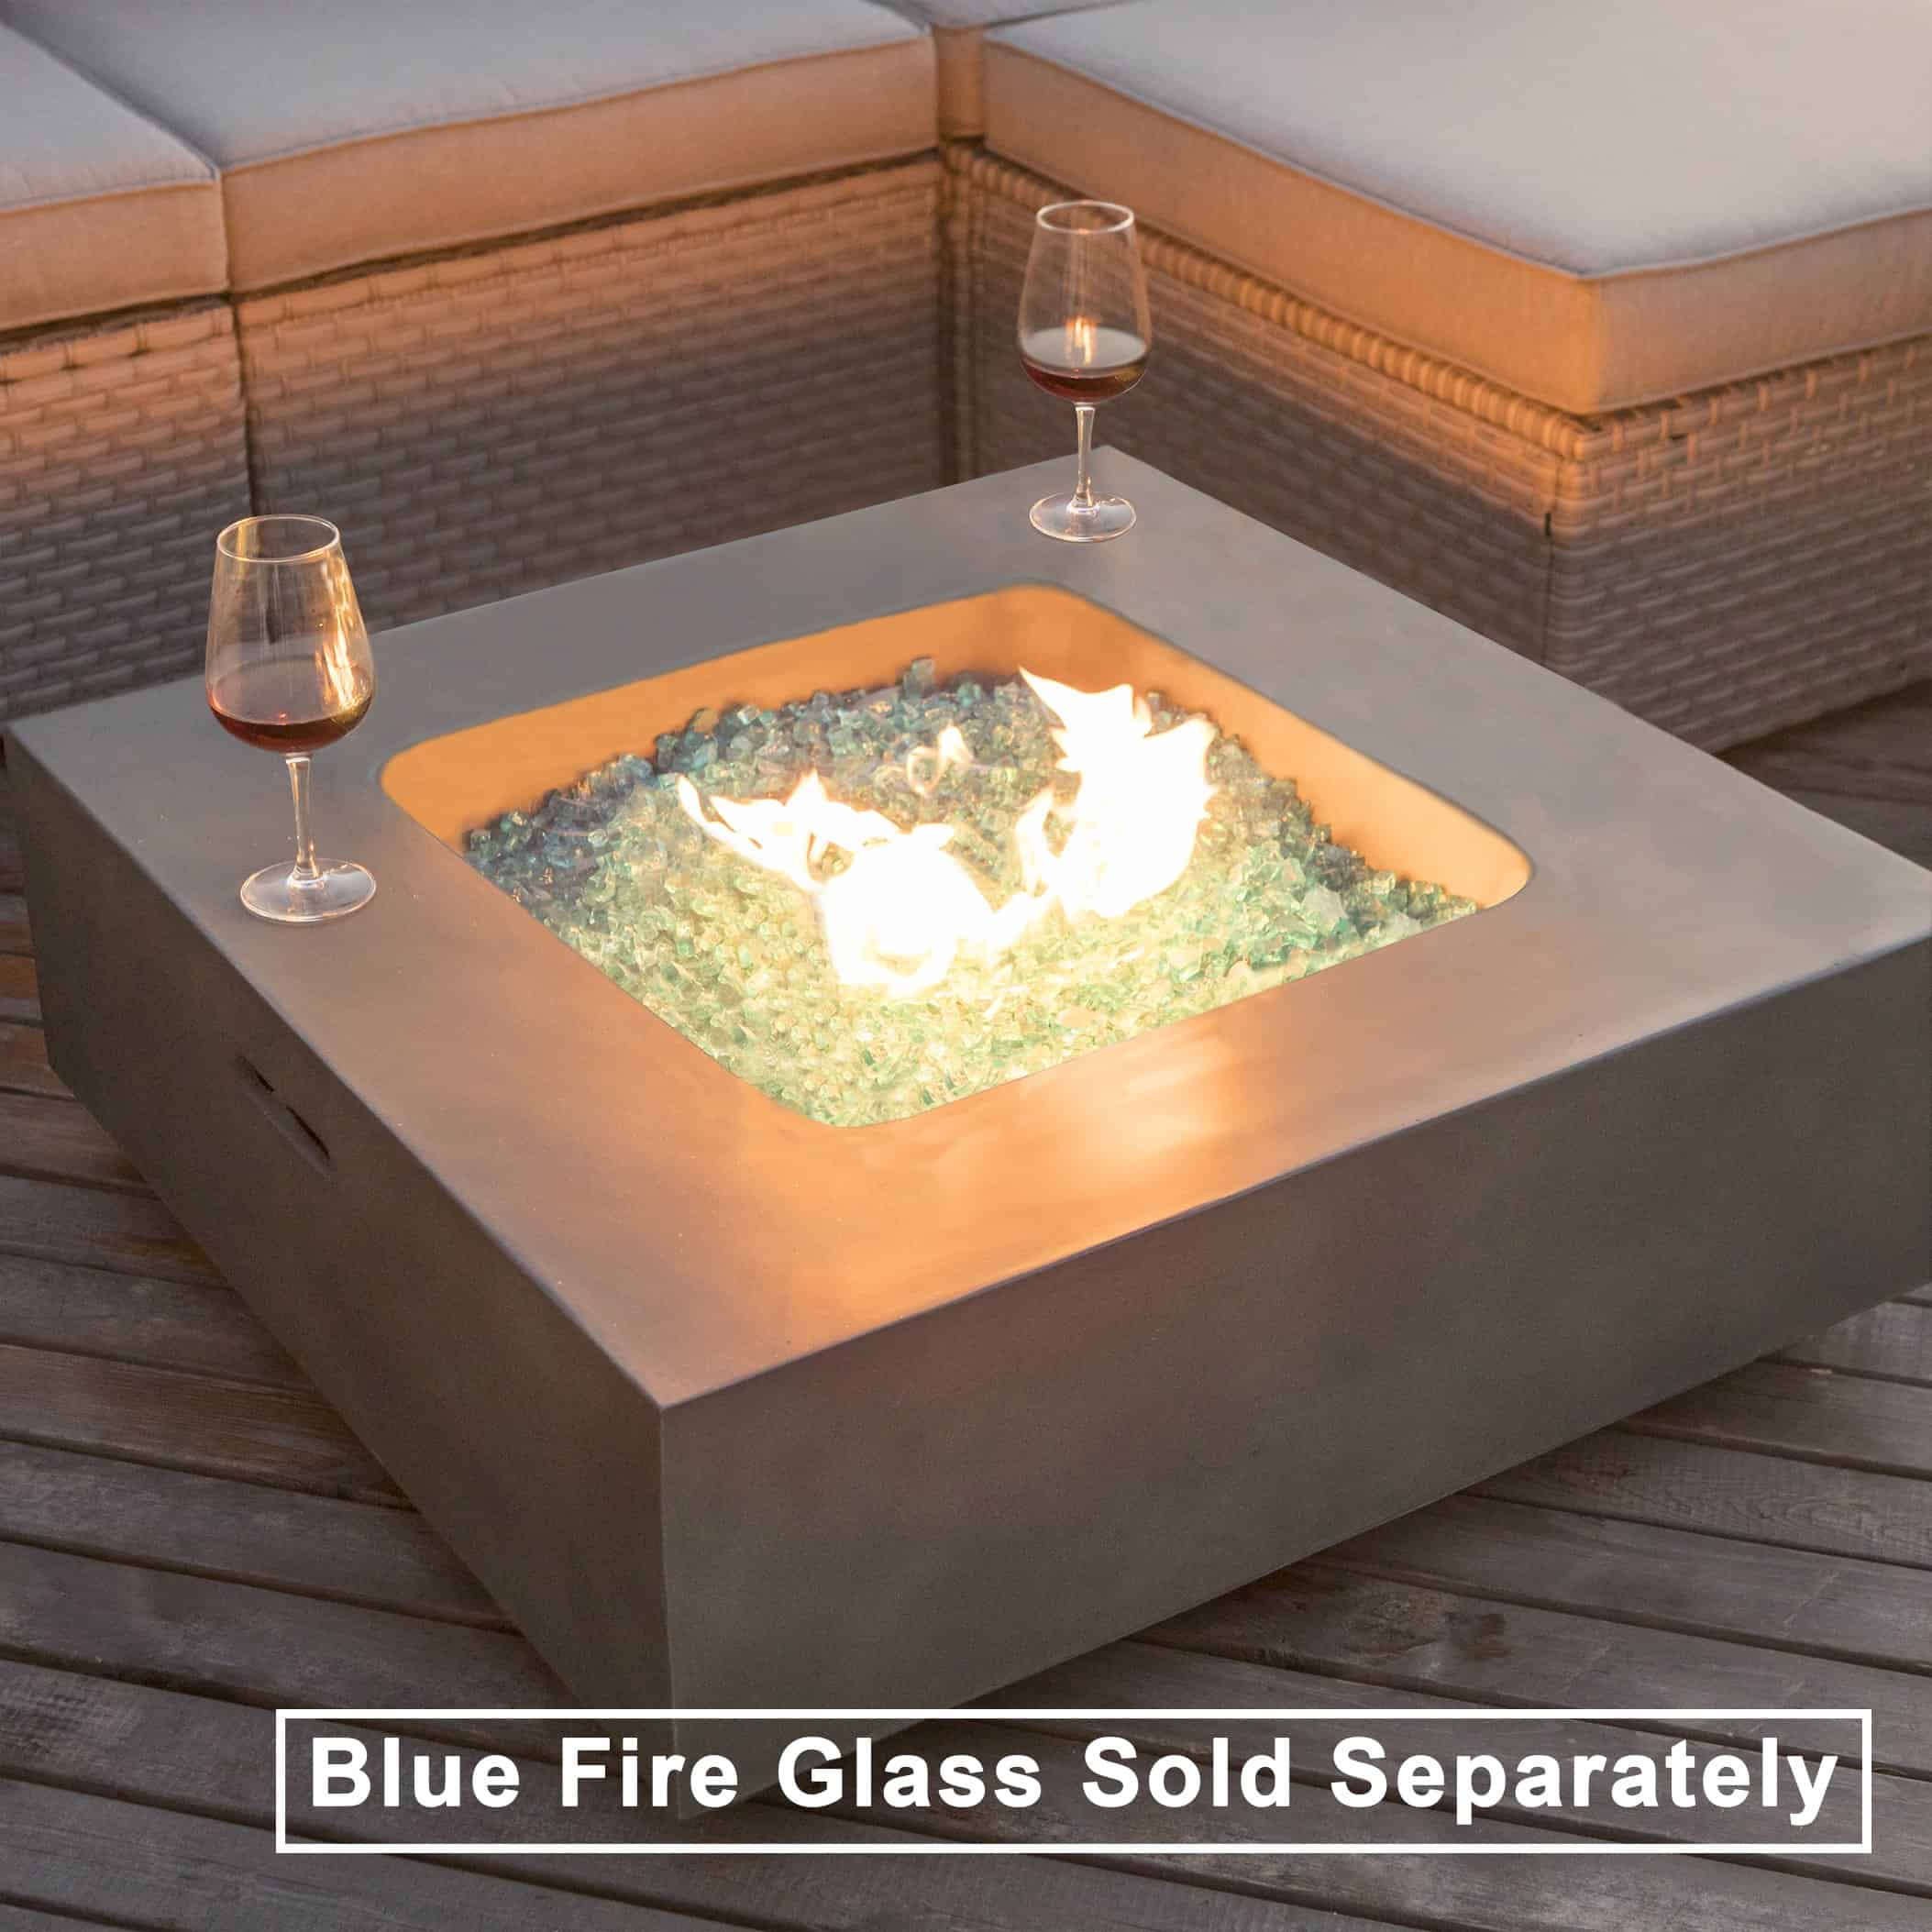 Sonder Square Outdoor Propane Fire Pit